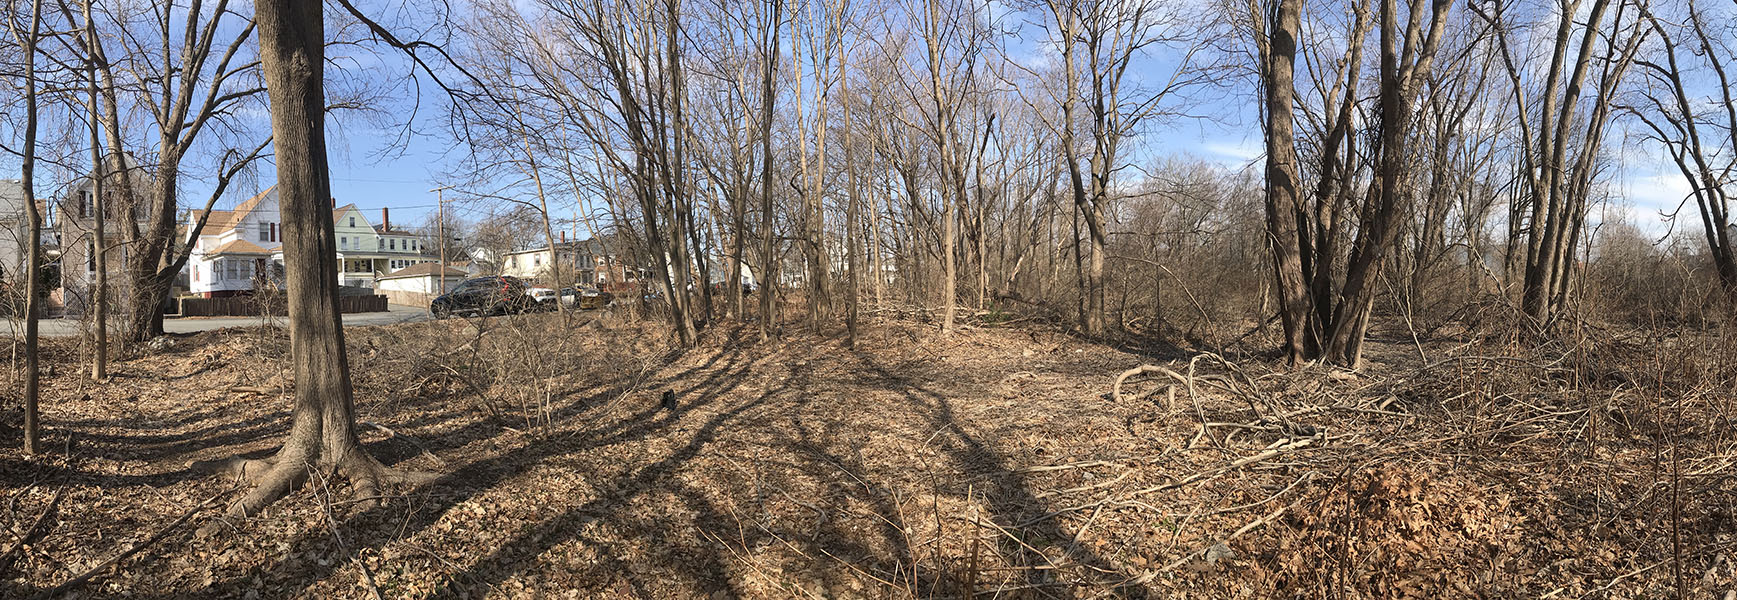 Wooded Area in New England Town, Bare and Brown in Winter